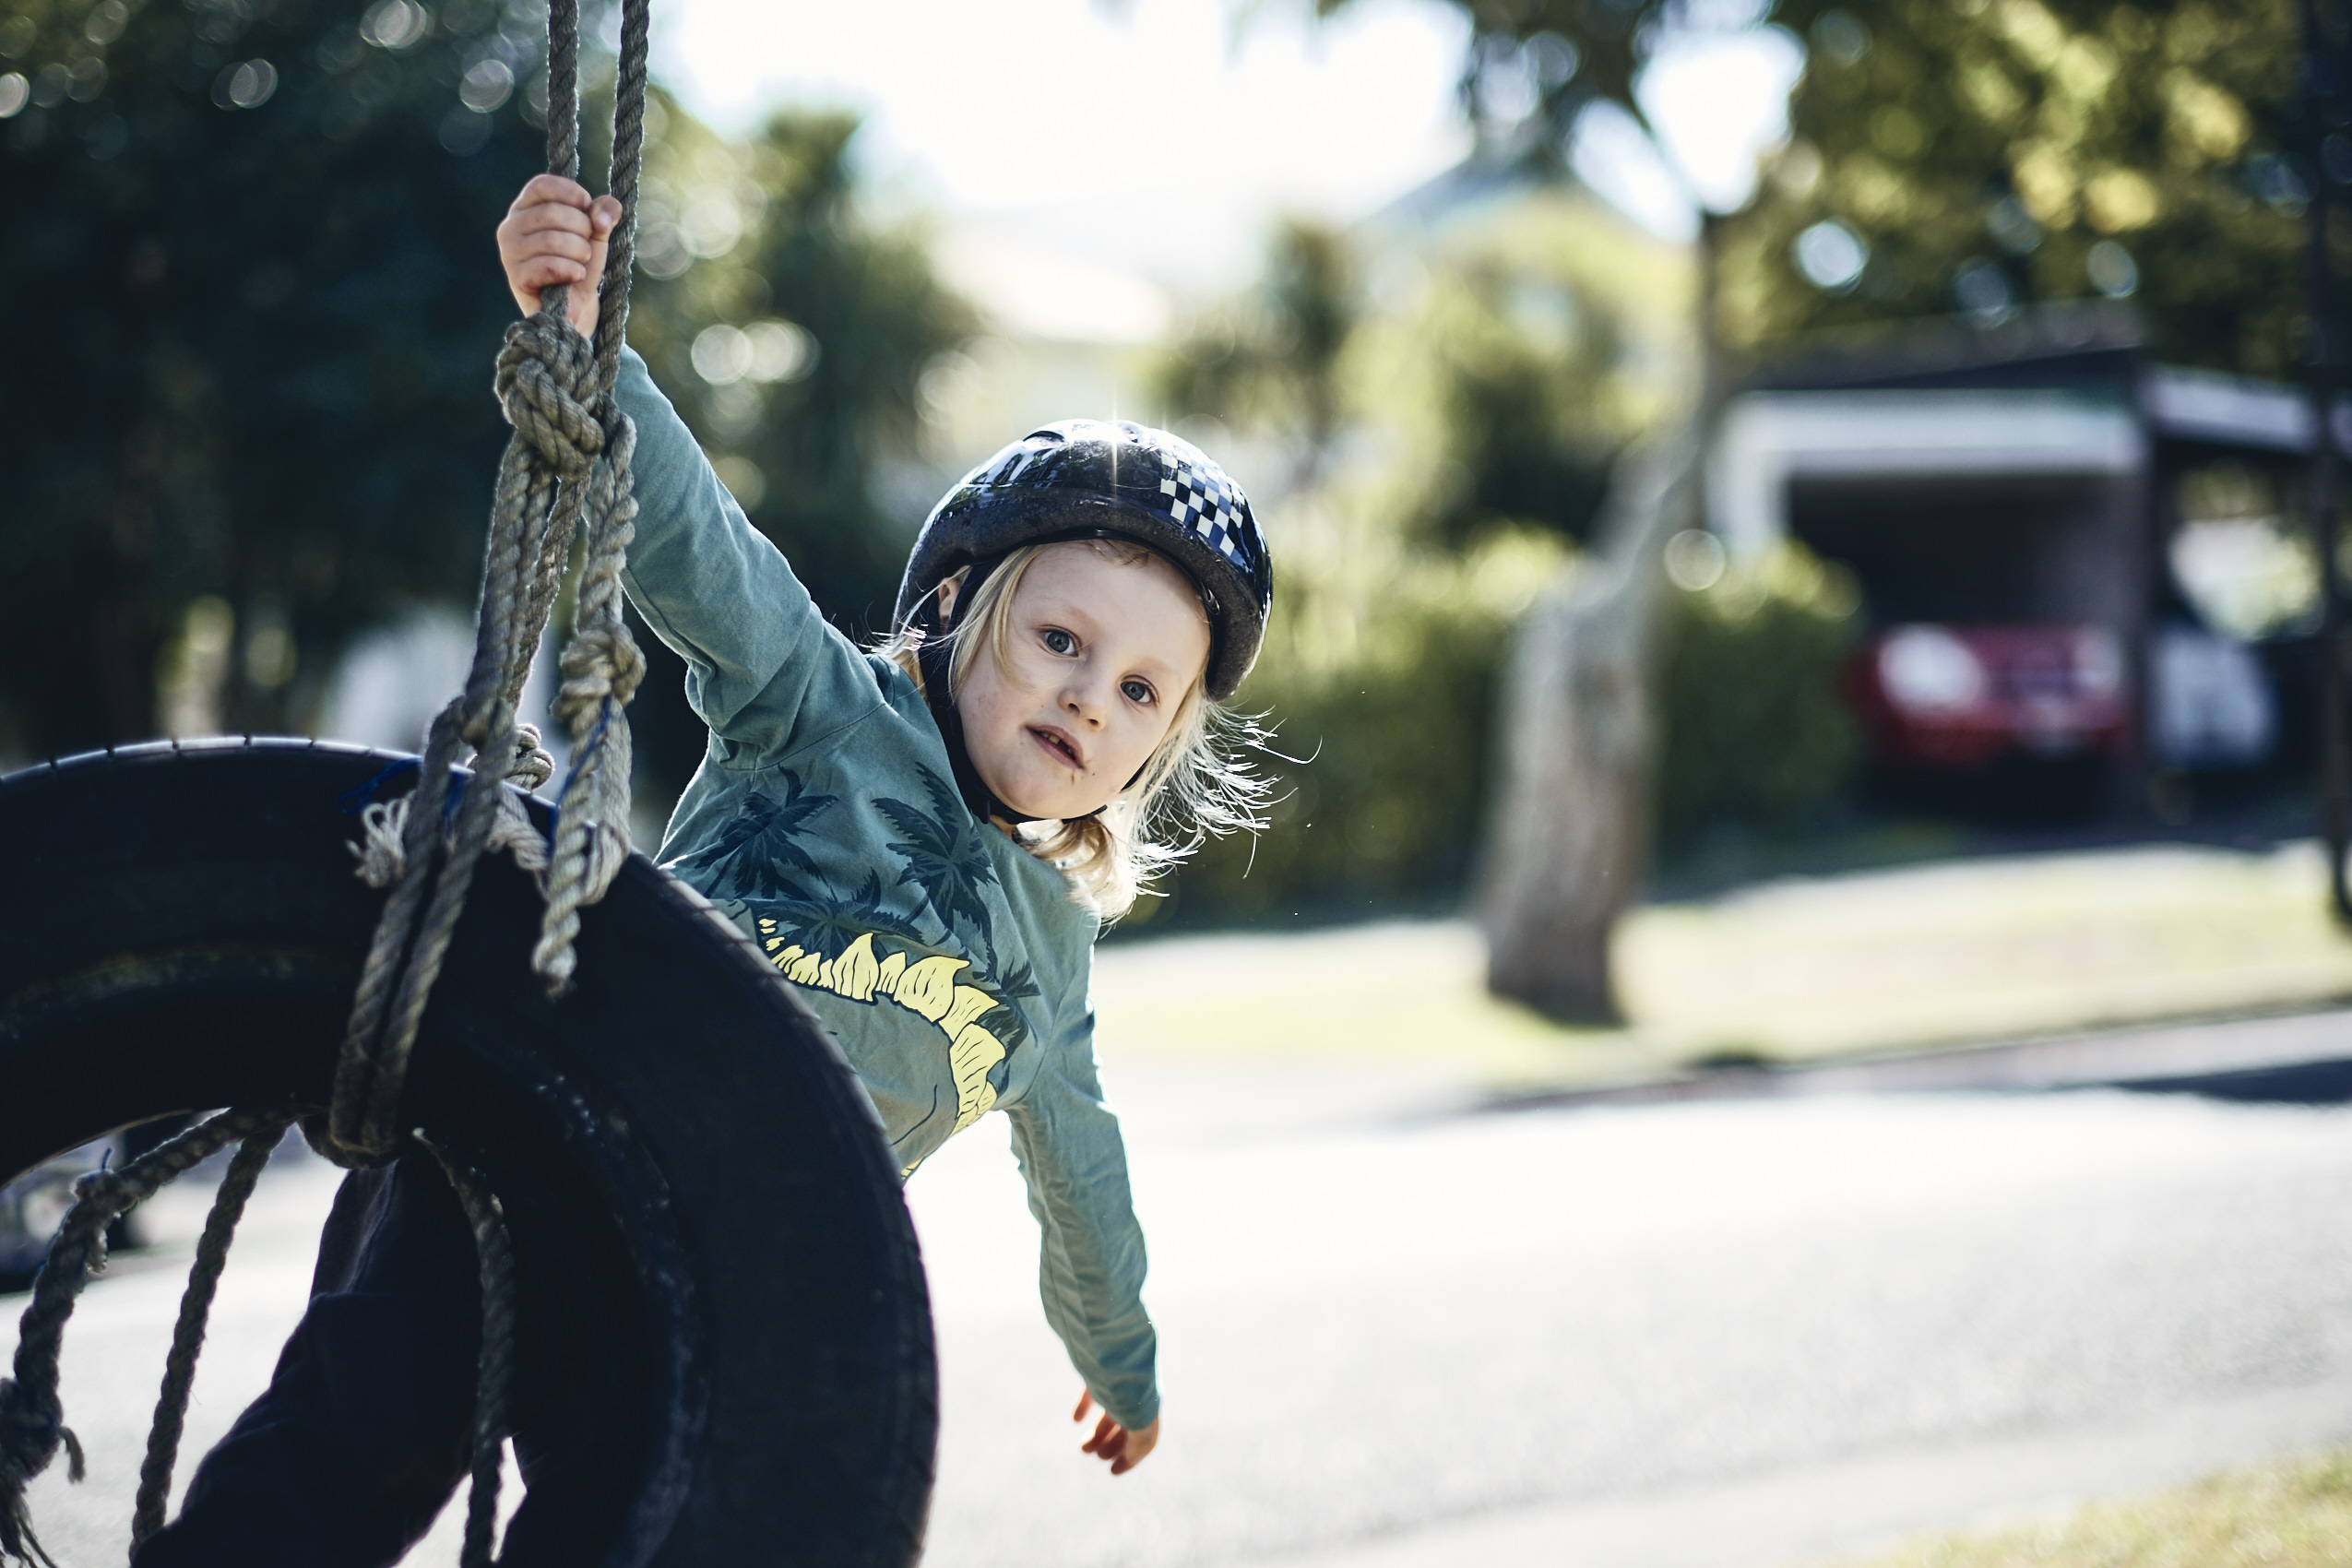 Lockdown • Young Boy Playing on Front Garden Tyre Swing • Lifestyle & Portrait Photography